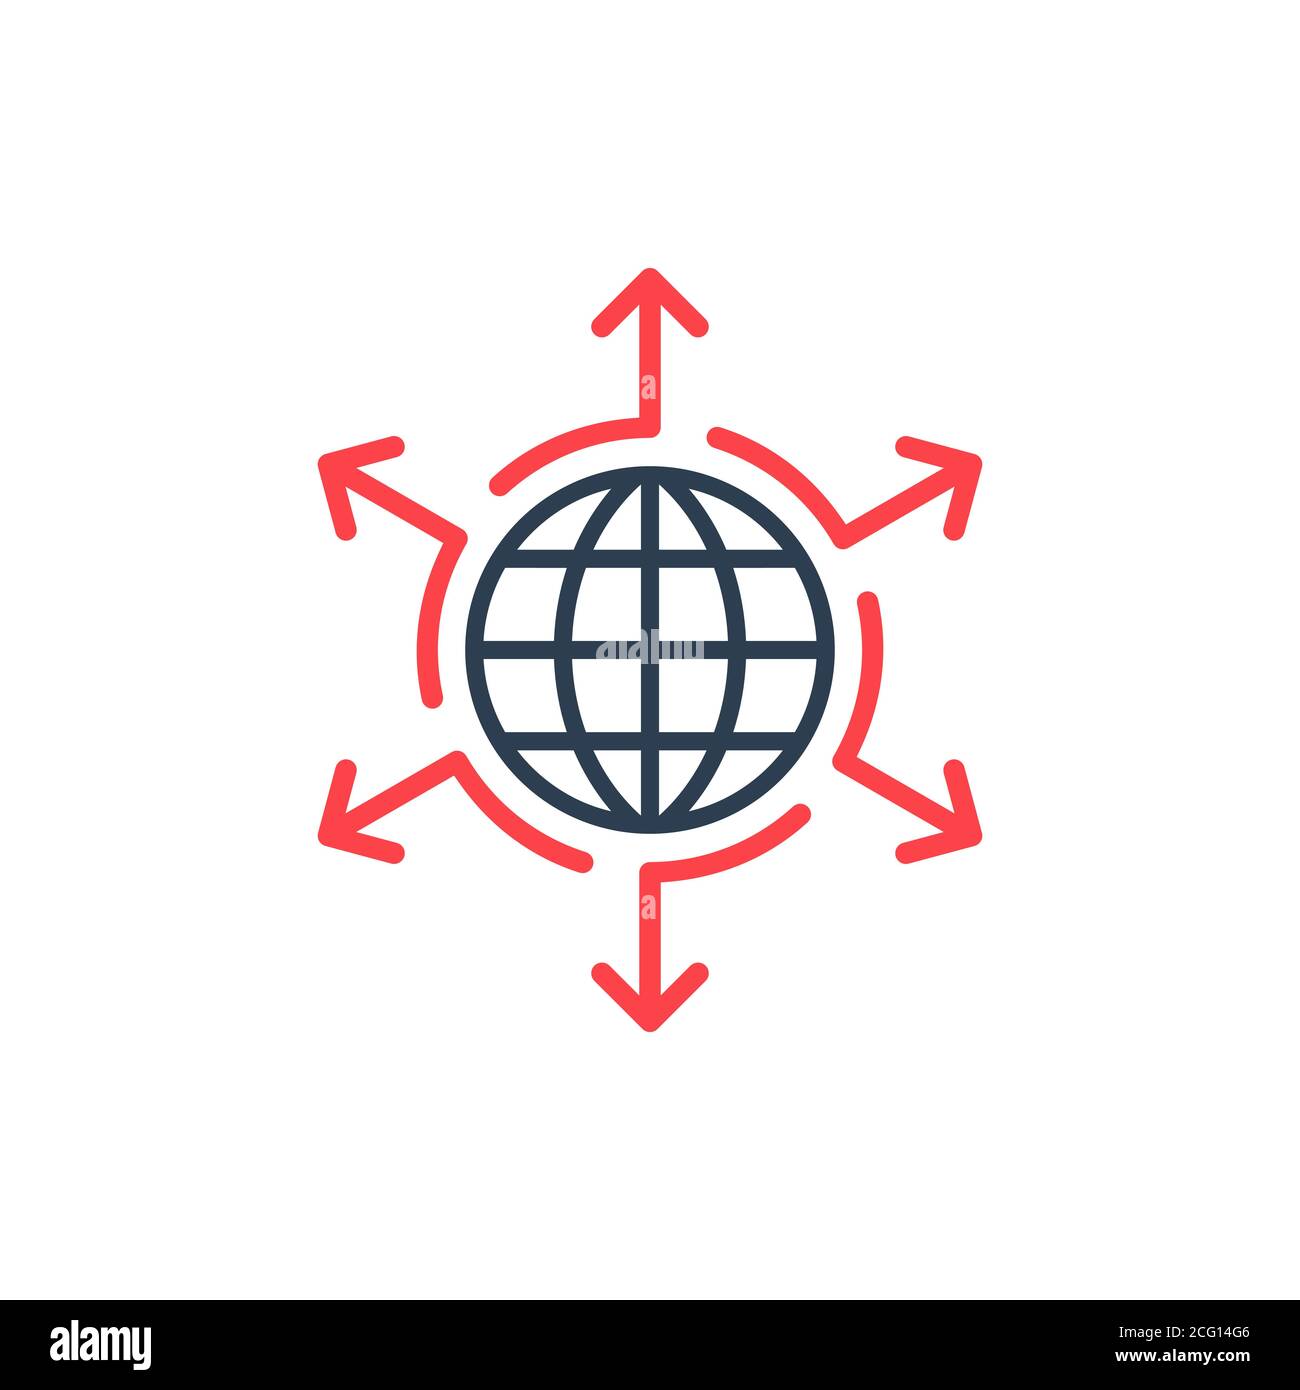 Infographic arrows around globe. Grow expand spread your company idea influence concept elements icon logo. Arrows in different direction. Stock Stock Vector